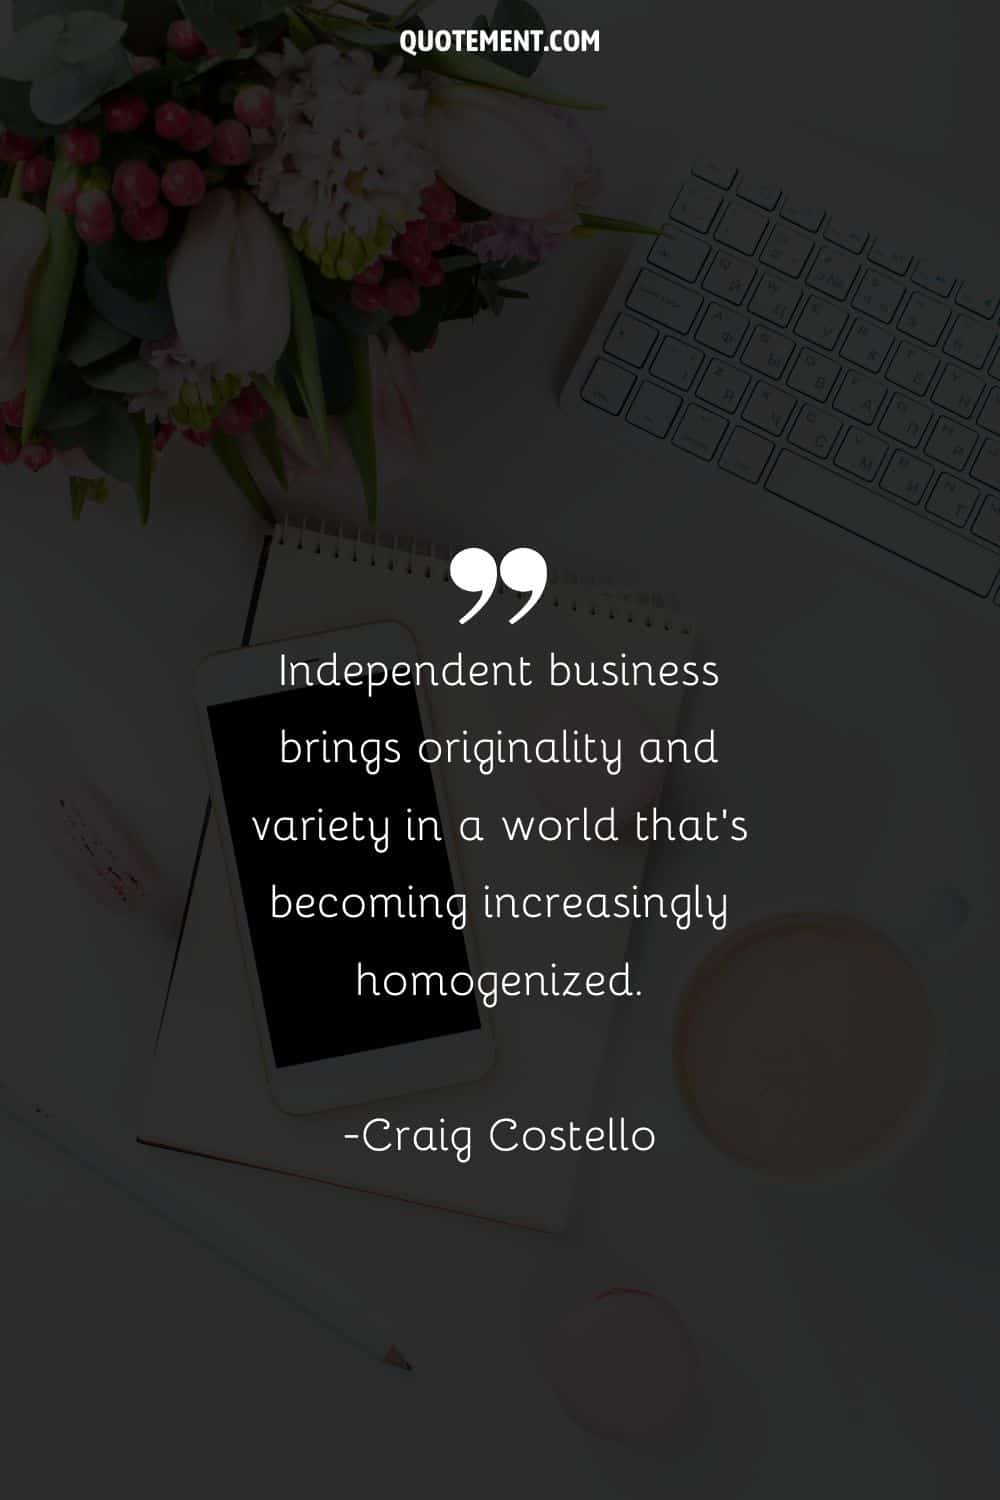 Quote for small business and office desk in the background.